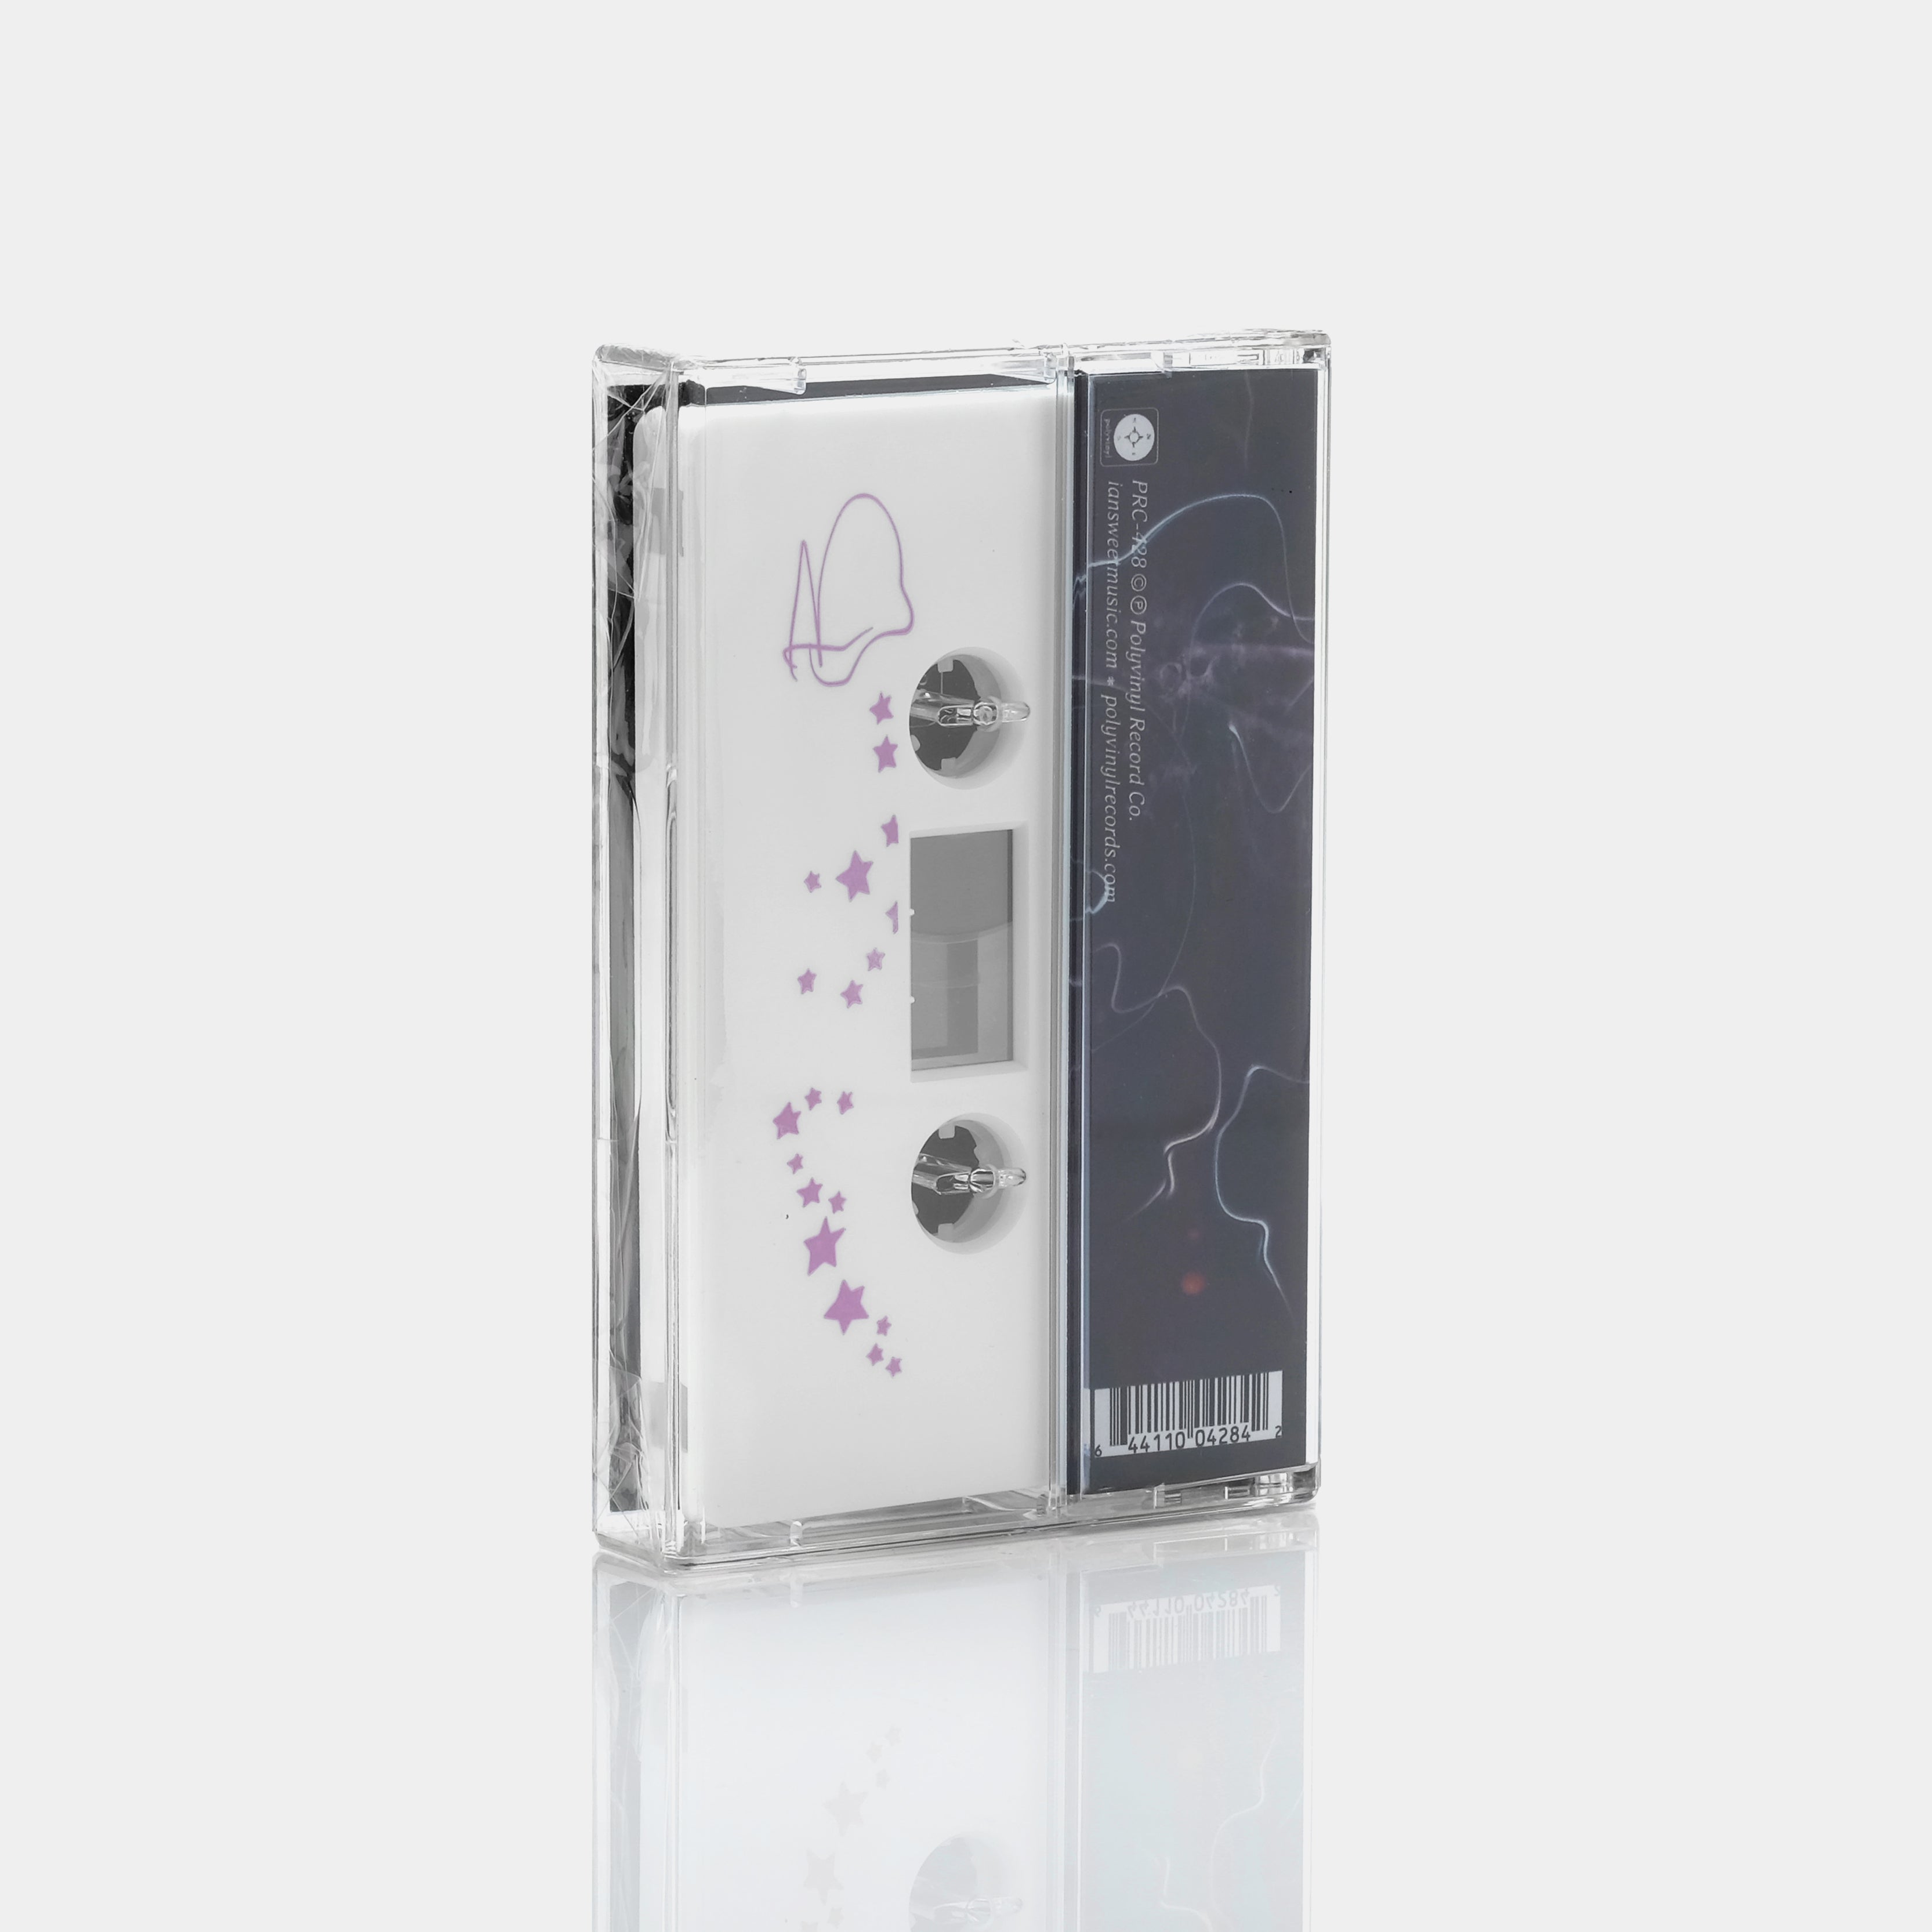 Ian Sweet - Show Me How You Disappear Cassette